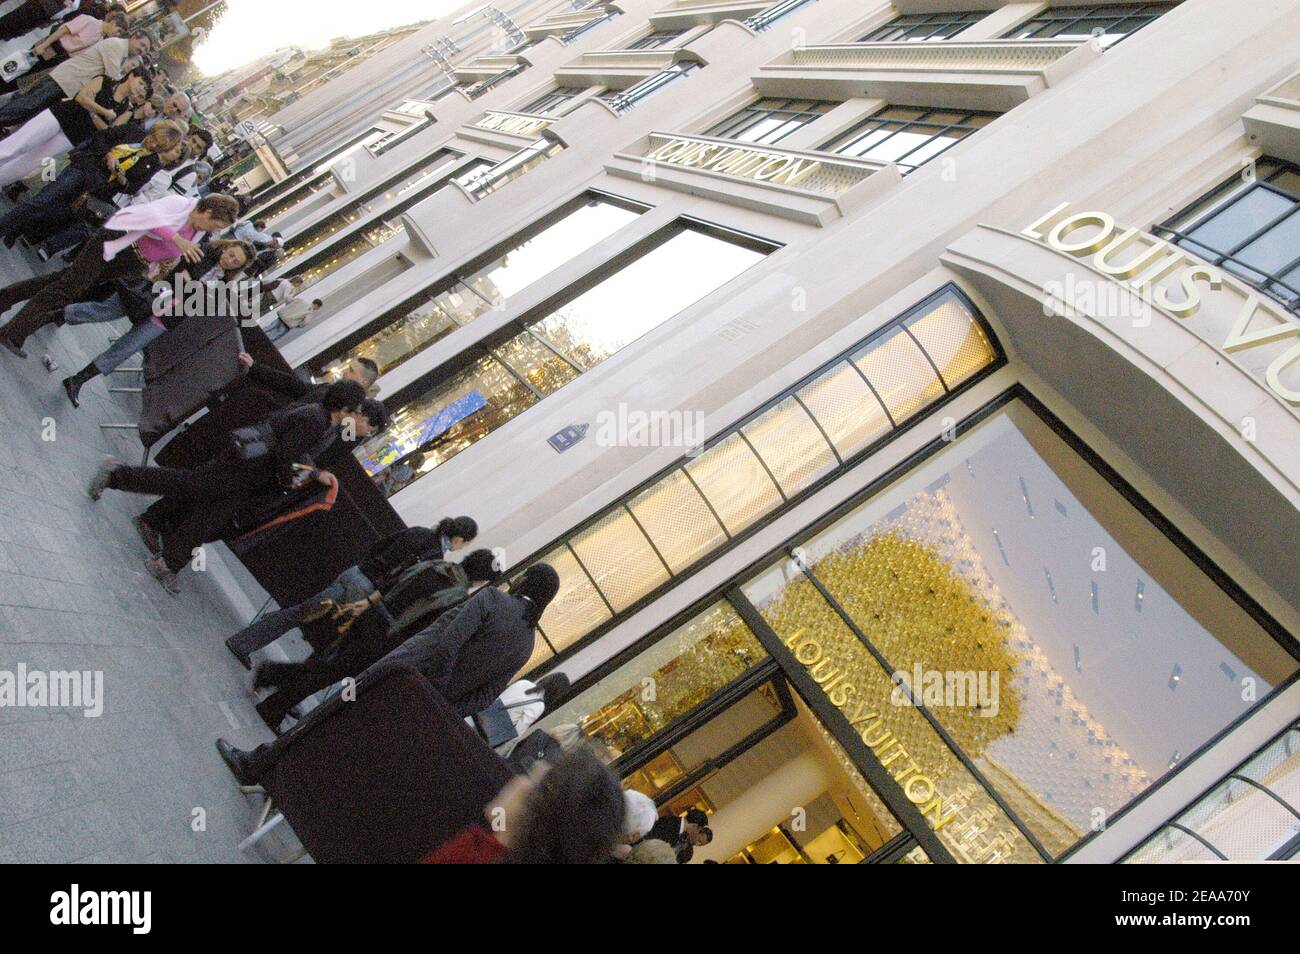 View of the new Louis Vuitton store of the Champs Elysees avenue in Paris,  France on November 1, 2005. The store is the world's biggest luxury store.  The newly remodeled store was